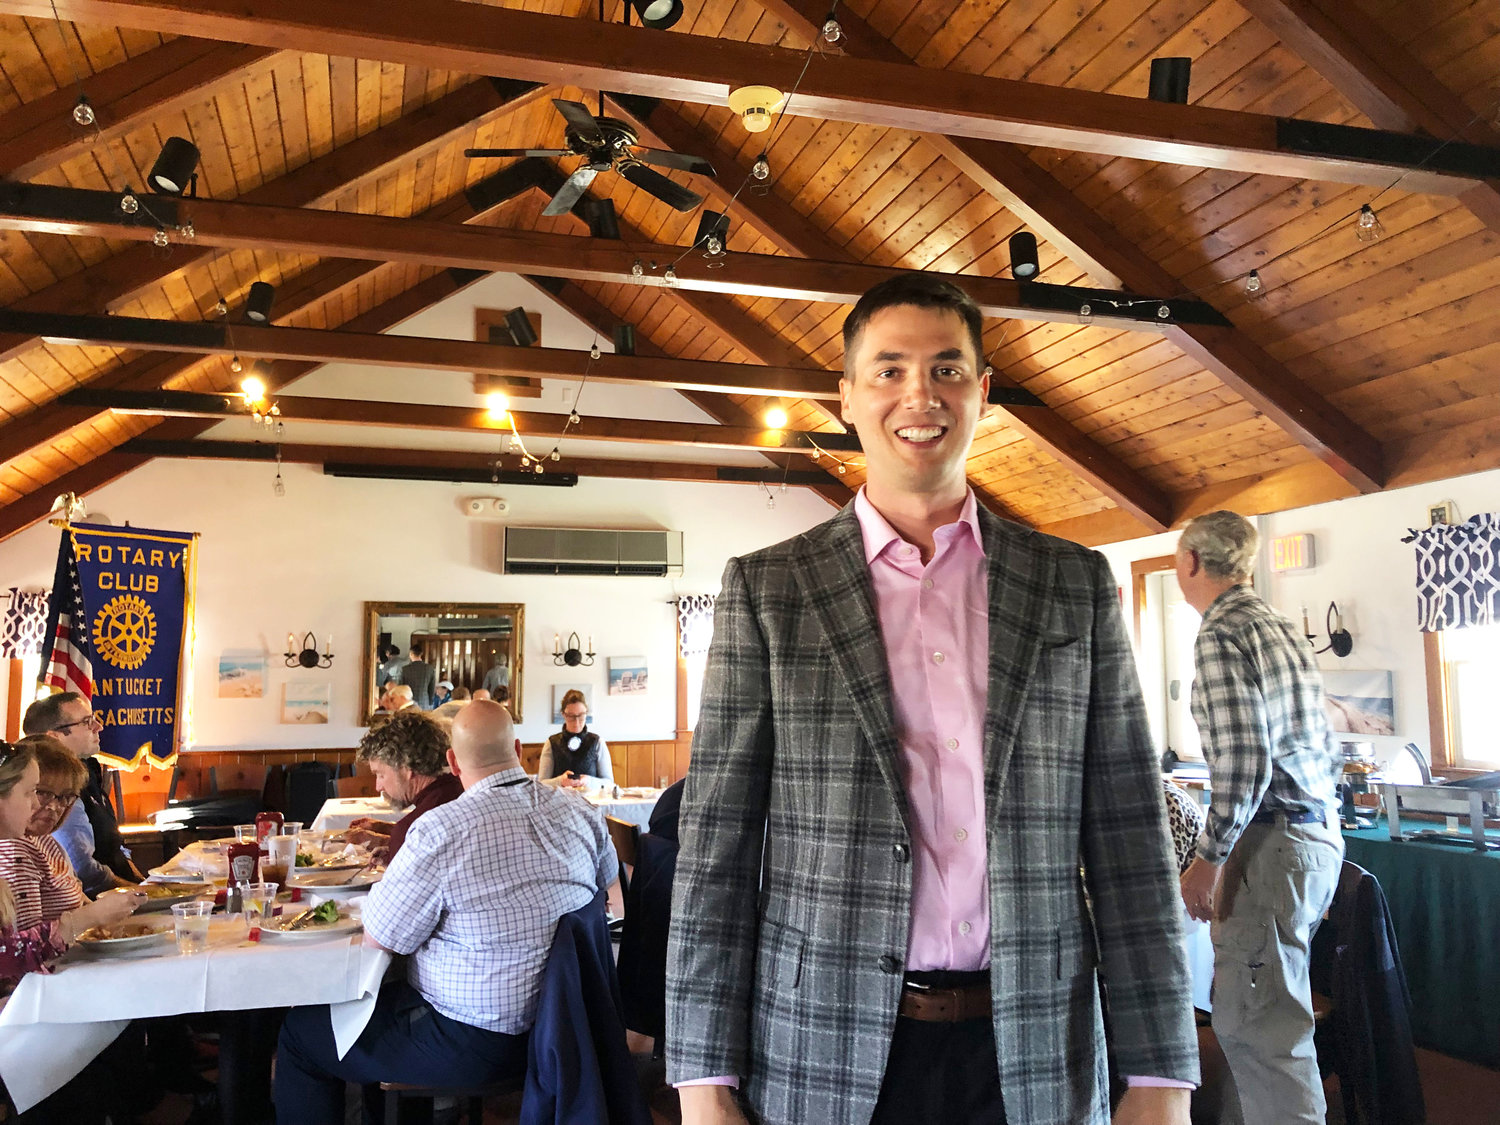 State Rep. Dylan Fernandes (D-Woods Hole) at Wednesday's Nantucket Rotary Club meeting at Faregrounds Restaurant.